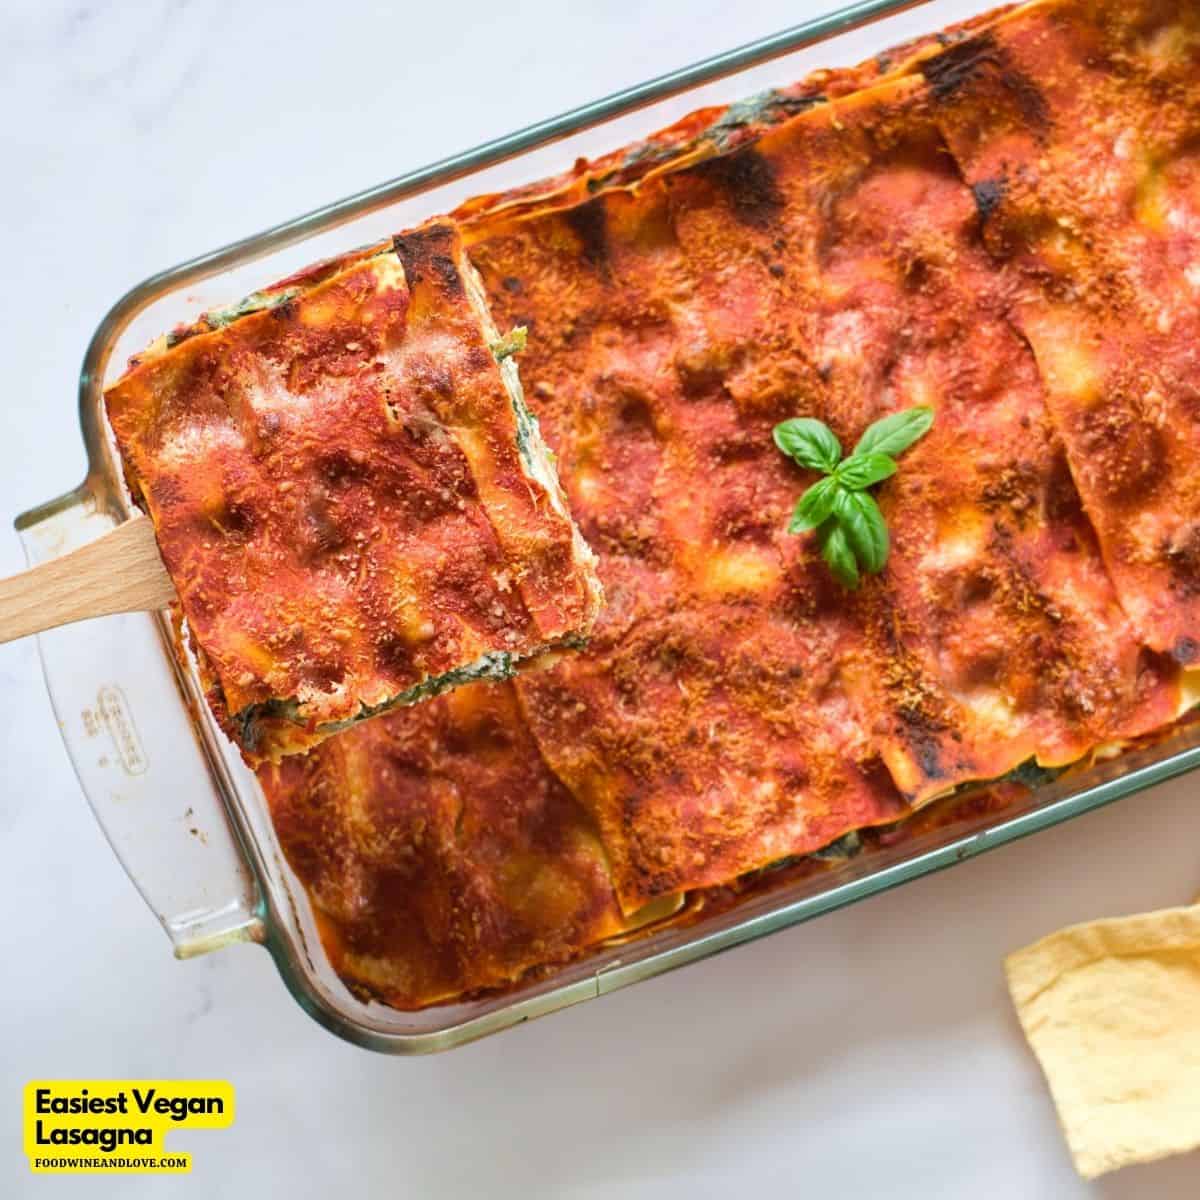 Easiest Vegan Lasagna- No Cashews!, a simple and delicious meal or dinner recipe made with no added dairy. Gluten Free.